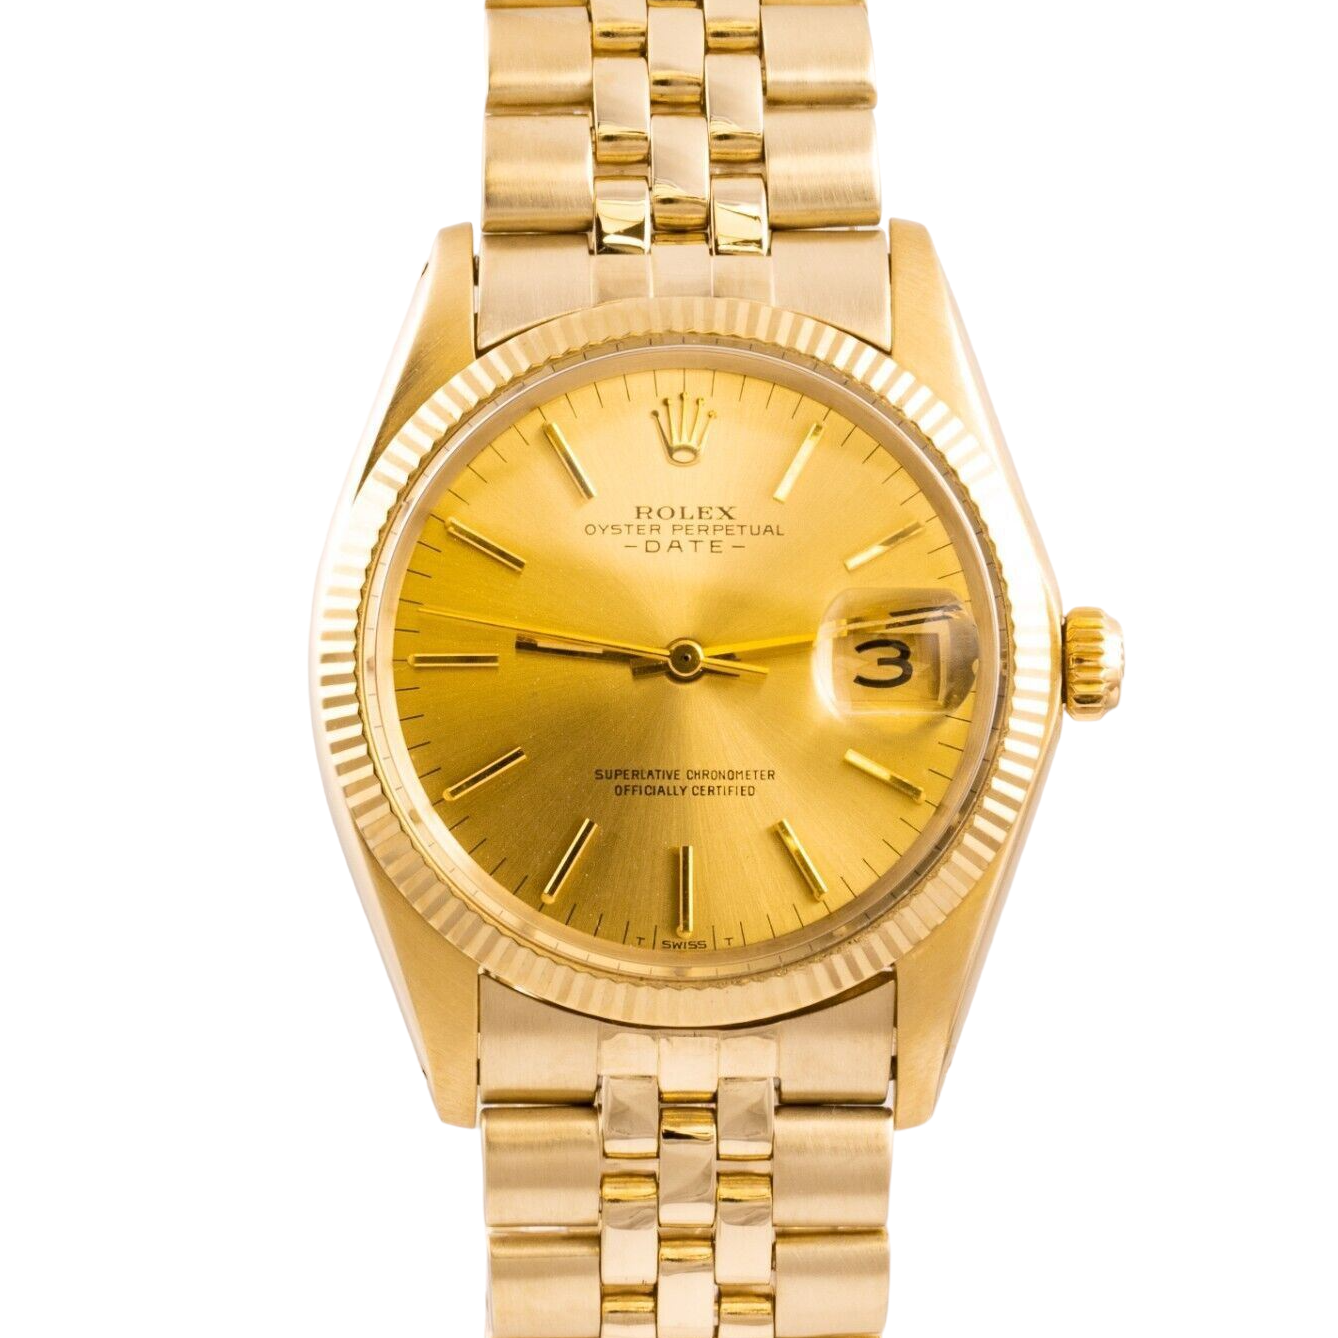 Gold Rolex Oyster Perpetual Datejust Chronometer Ref. 1600 vintage